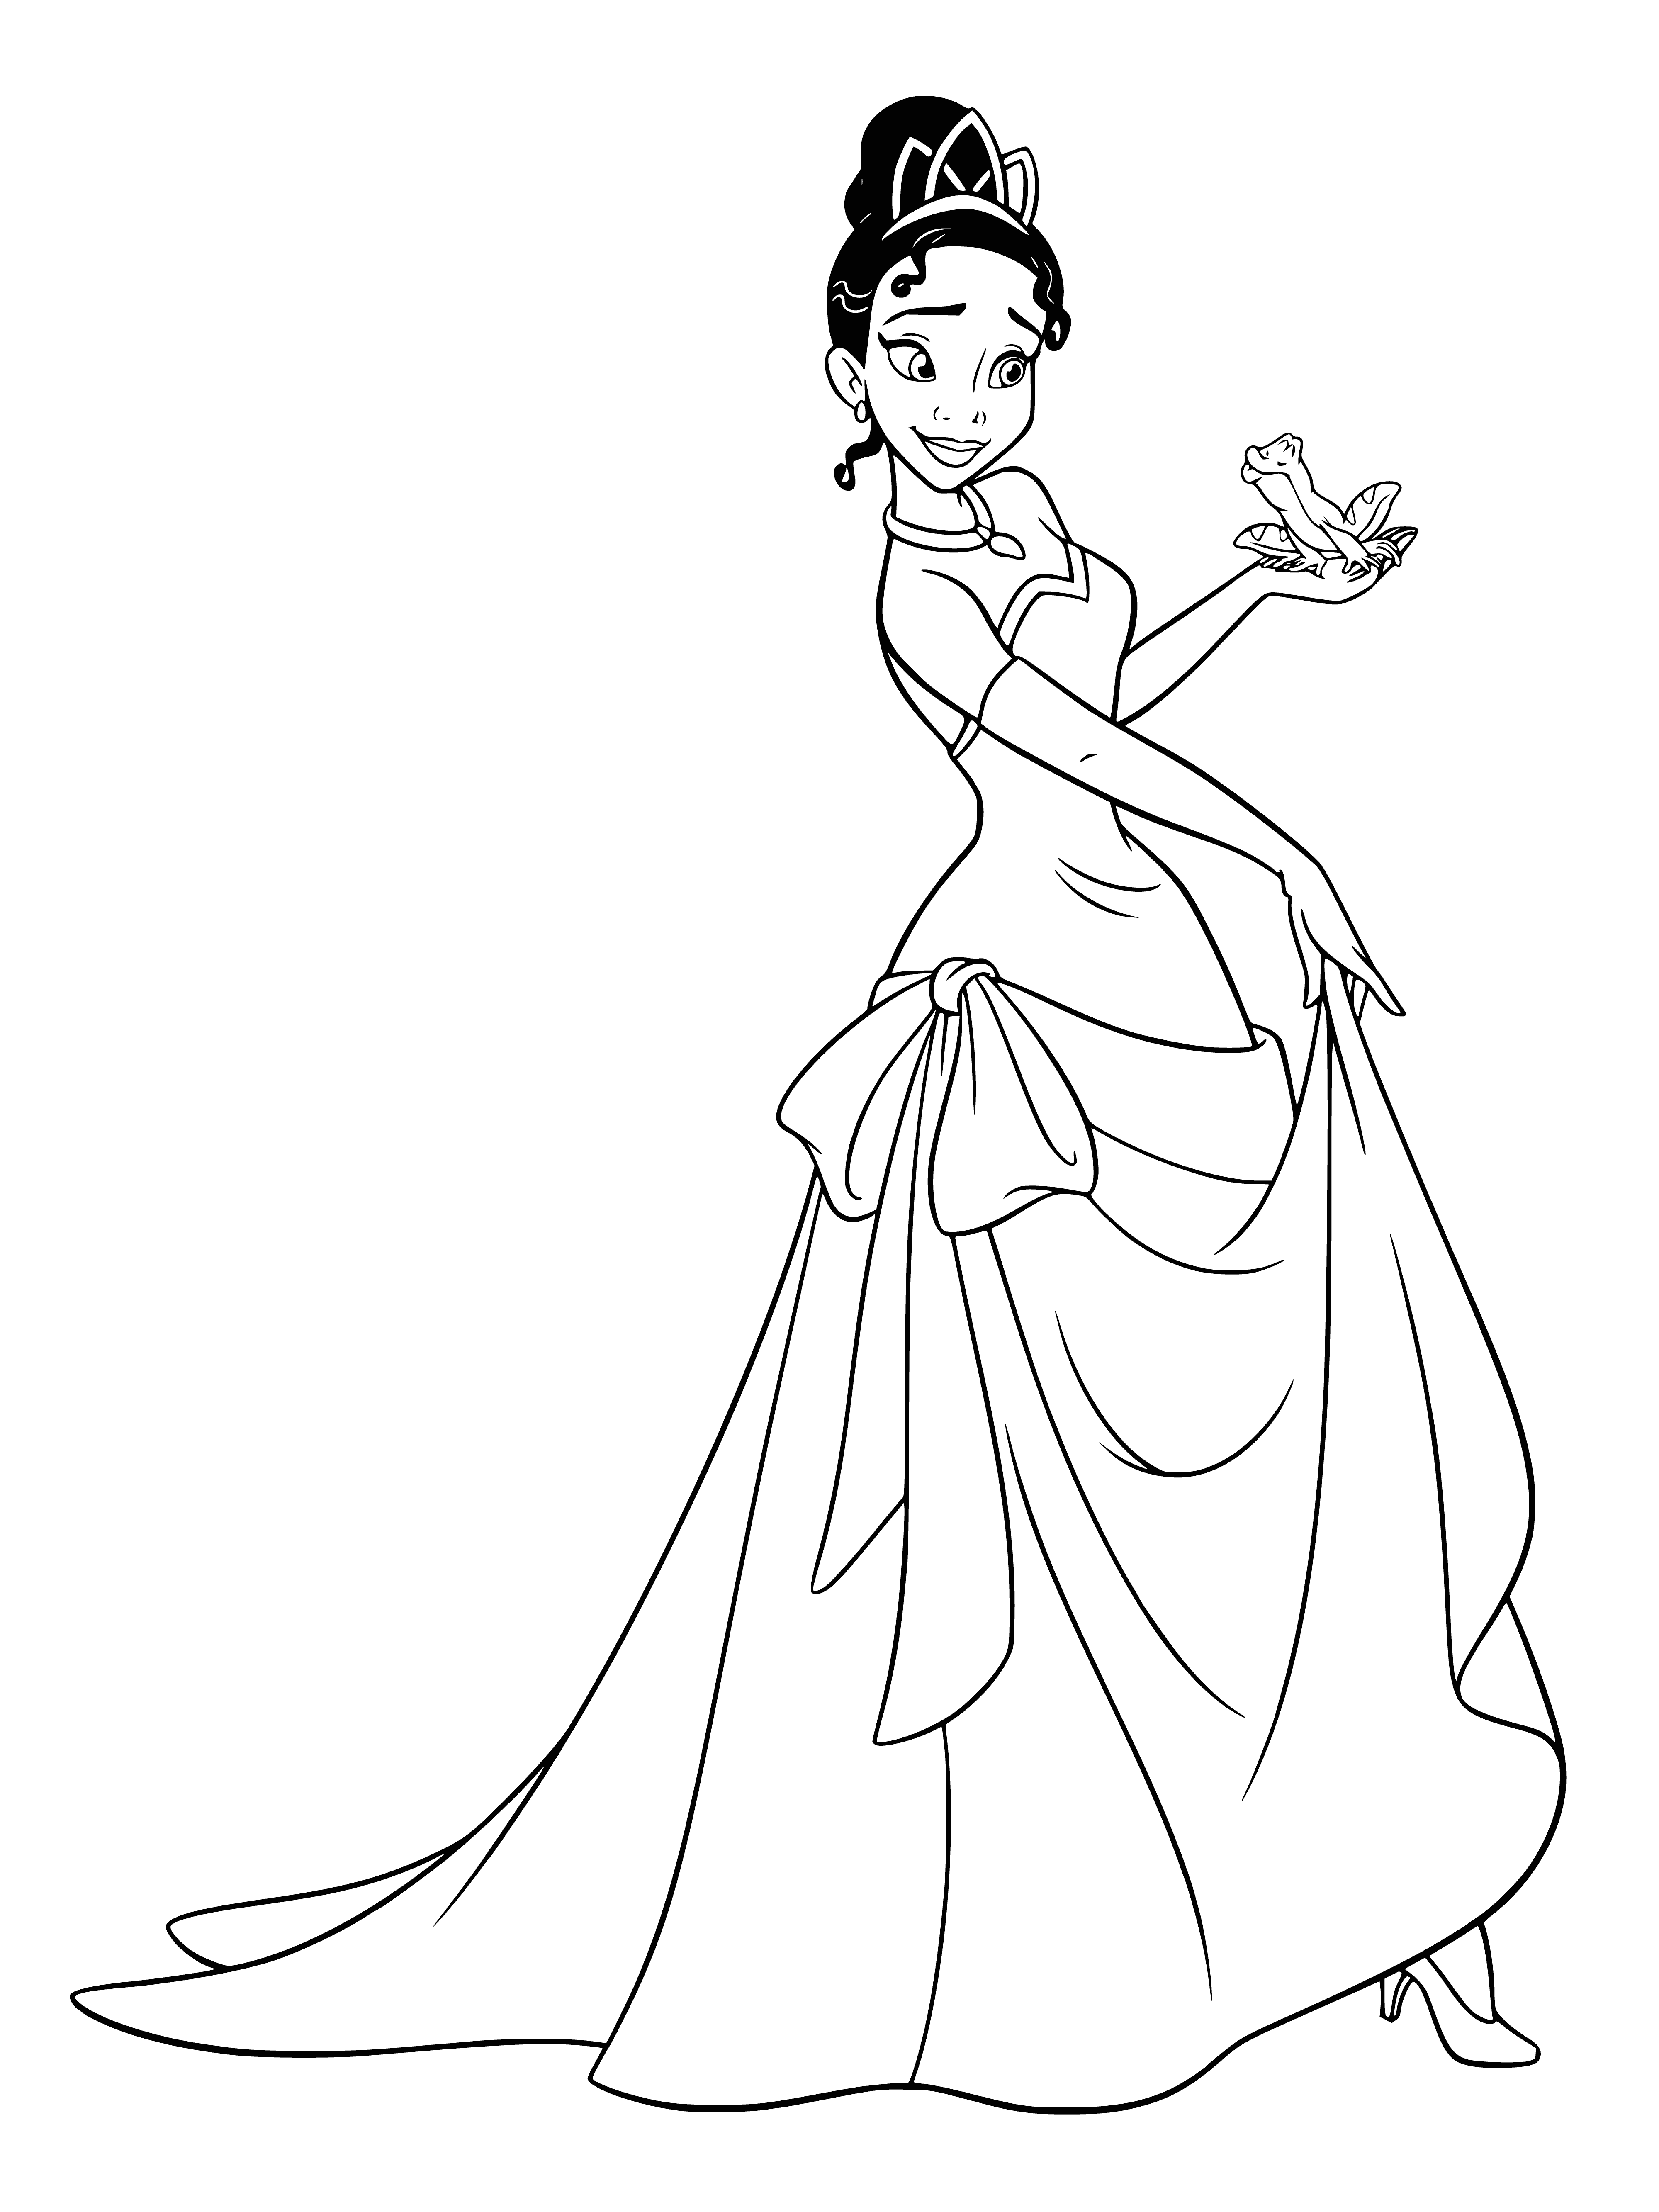 Tiana and the frog coloring page